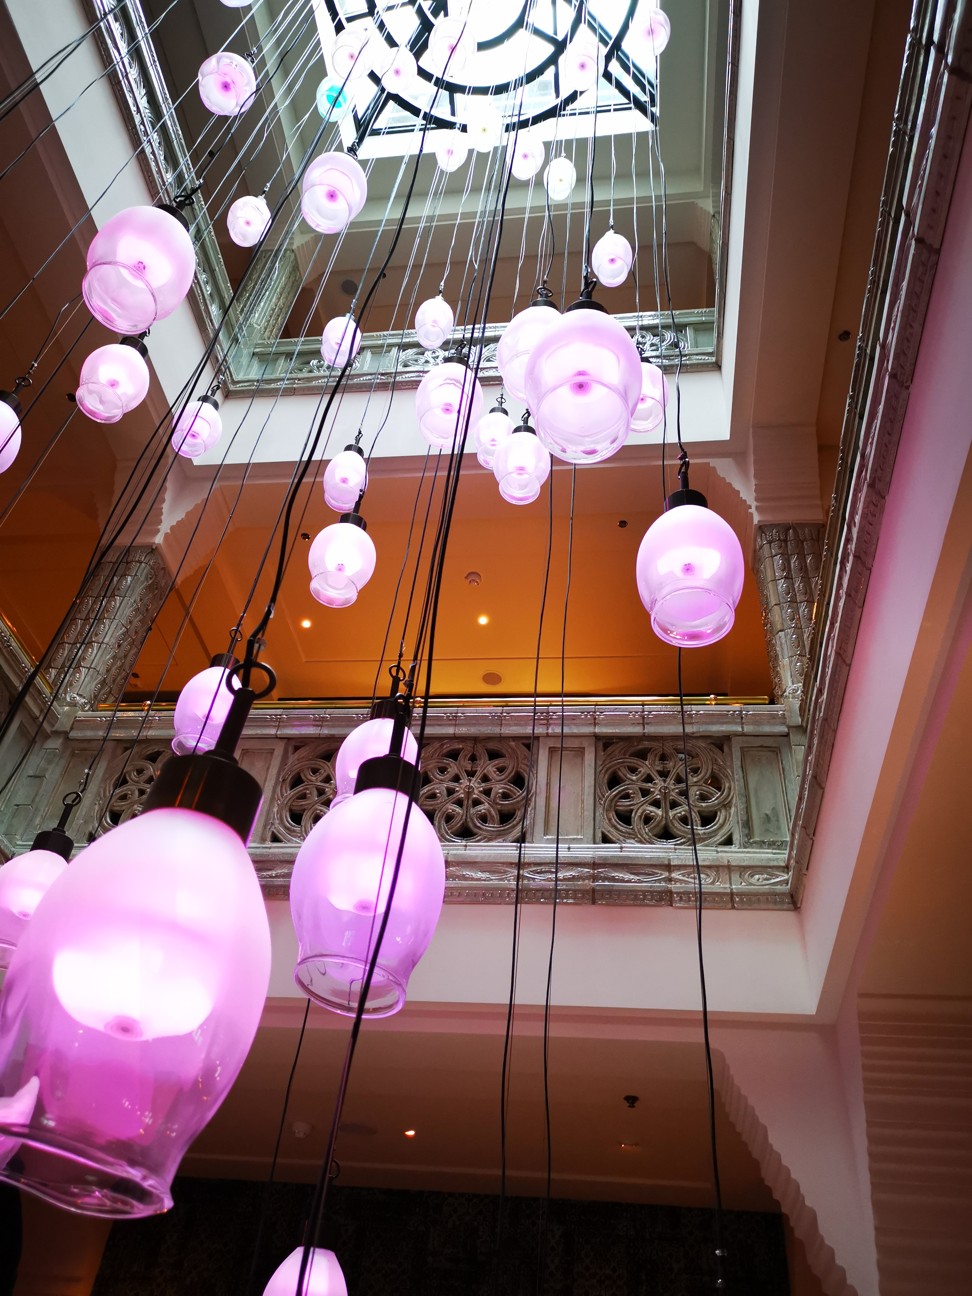 Numerous bright coloured lamps hang from the large central stairwell at the Hotel TwentySeven. Photo: Winnie Chung